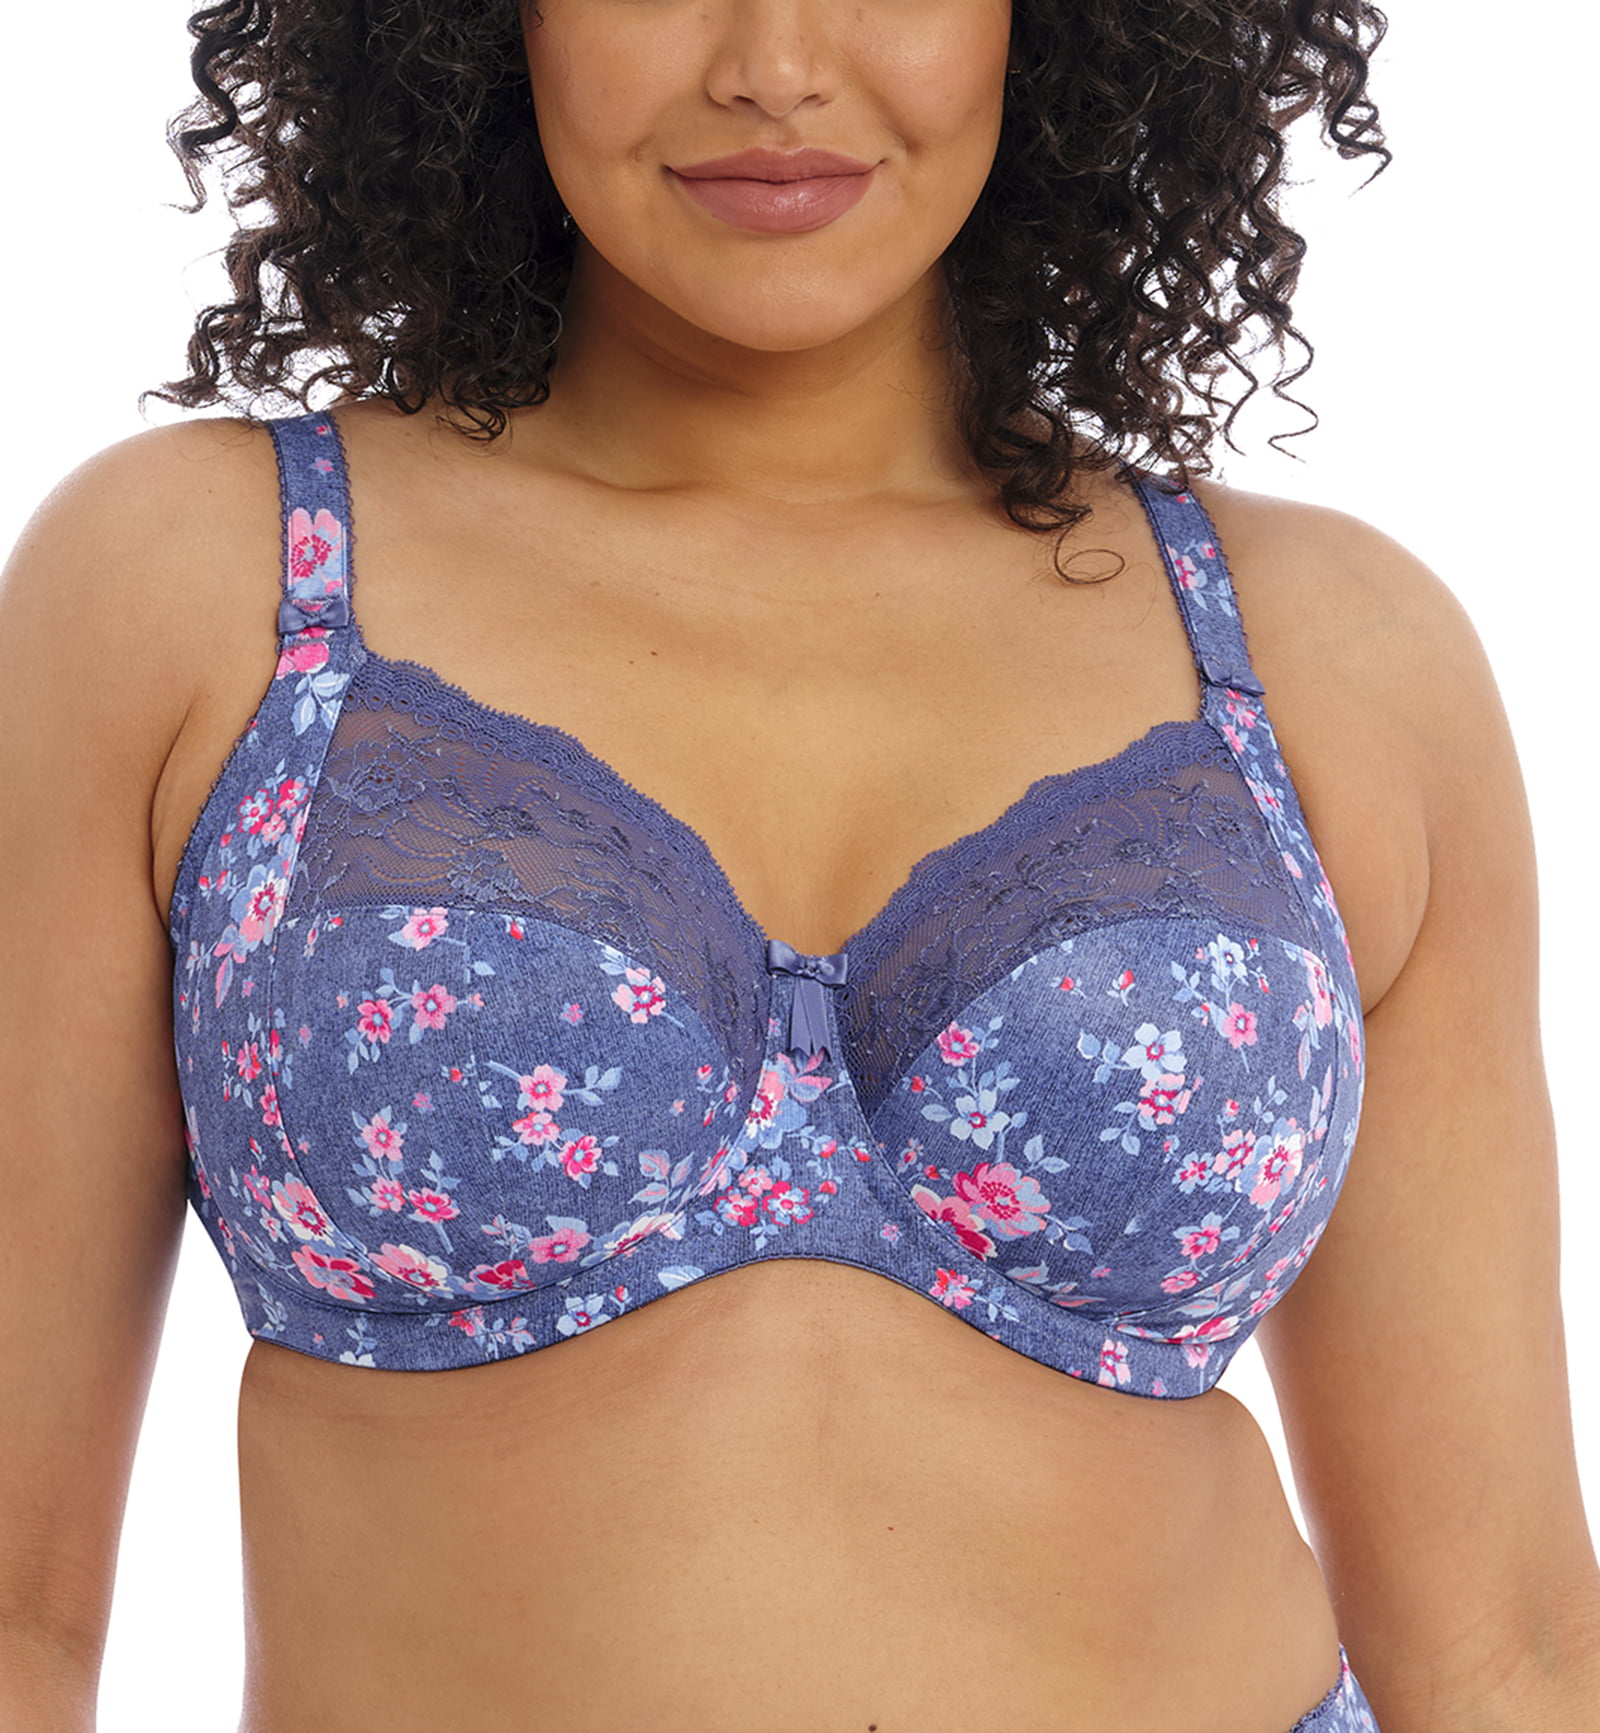 Elomi Morgan Stretch Lace Banded Underwire Bra (4110),38G